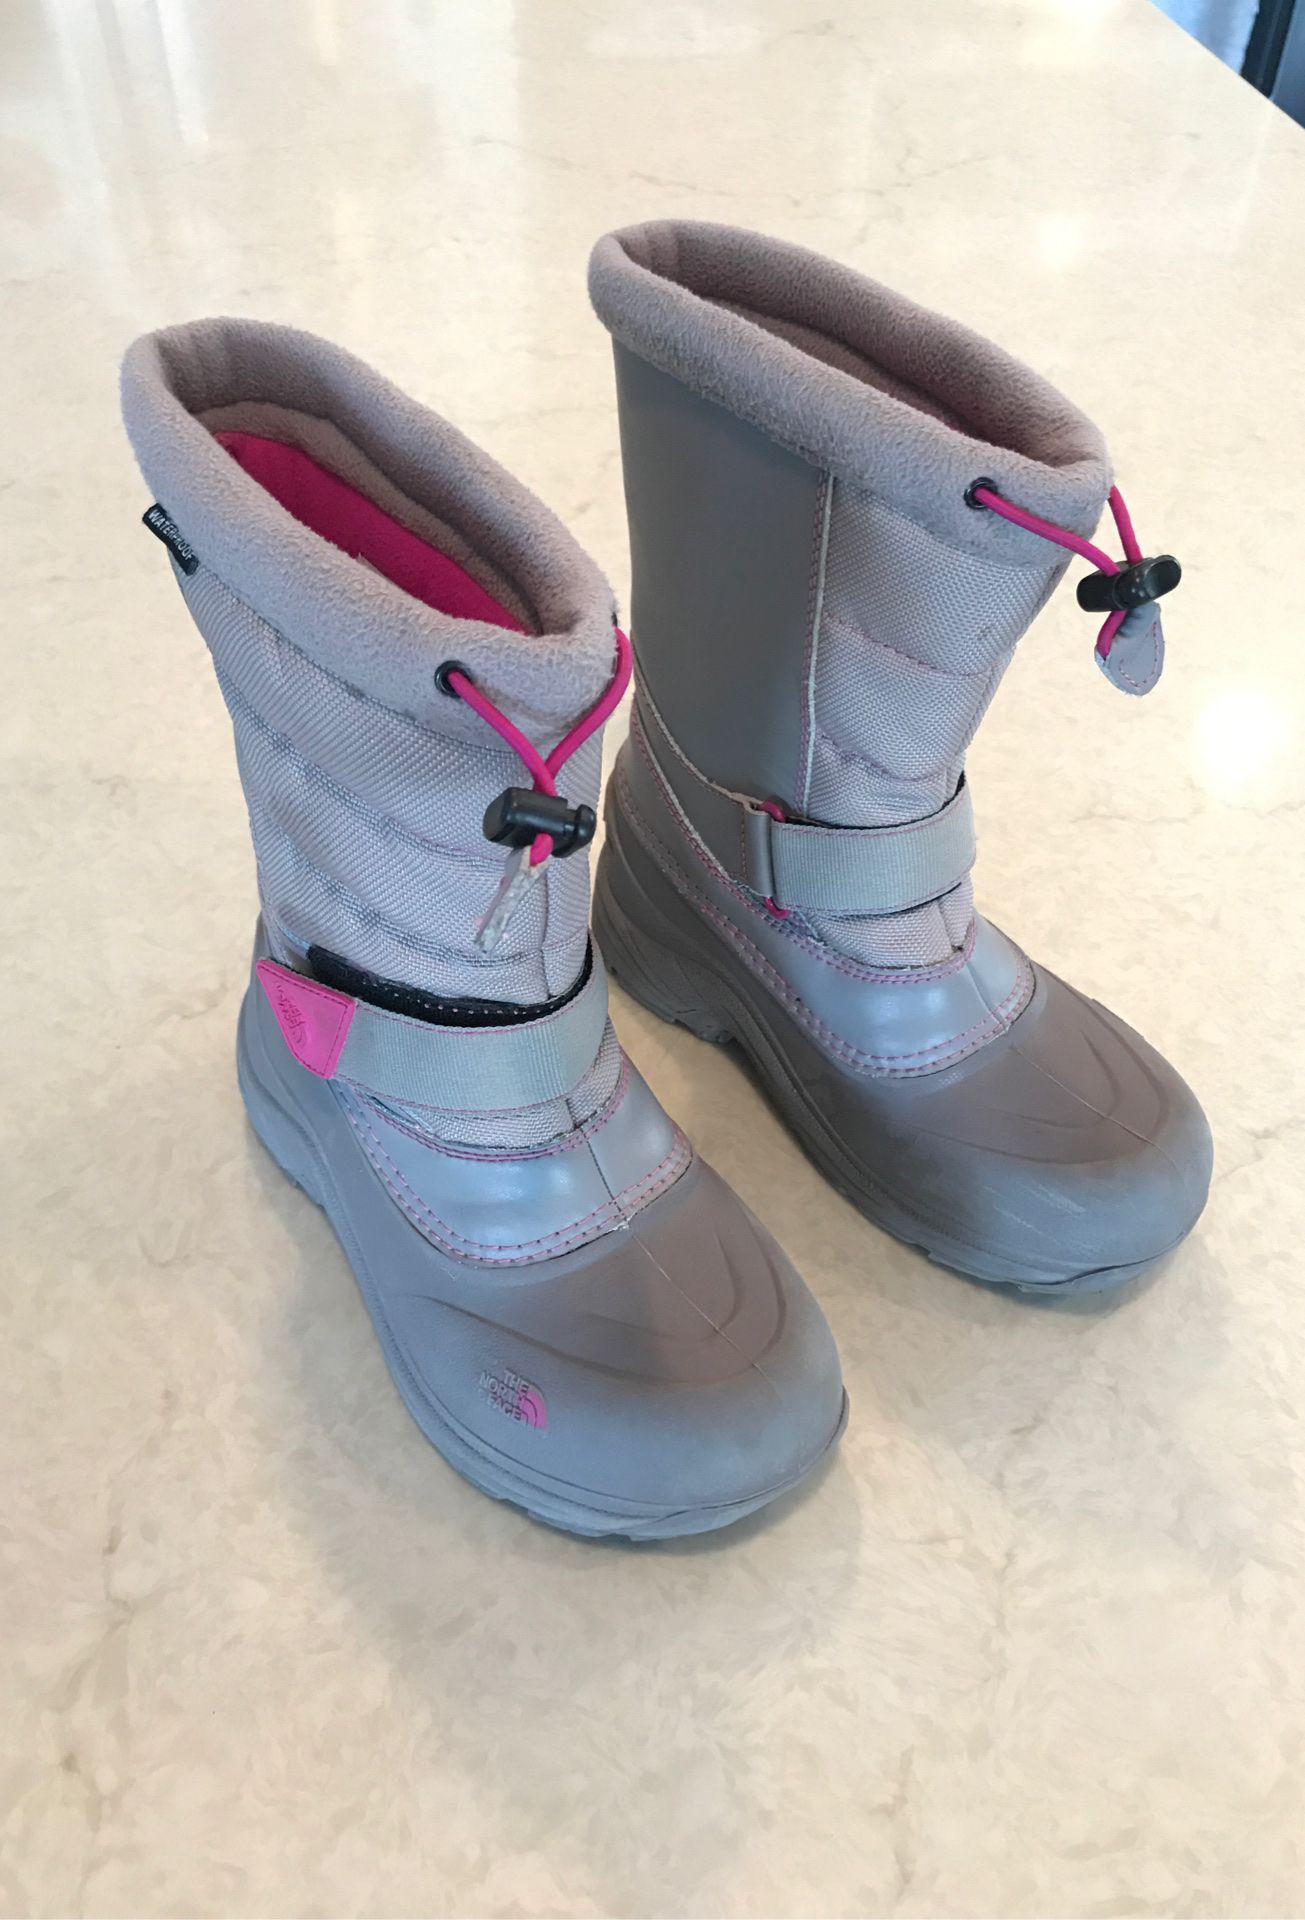 The North Face kids winter snow boots SIZE 1 girl/boy Pink & Gray